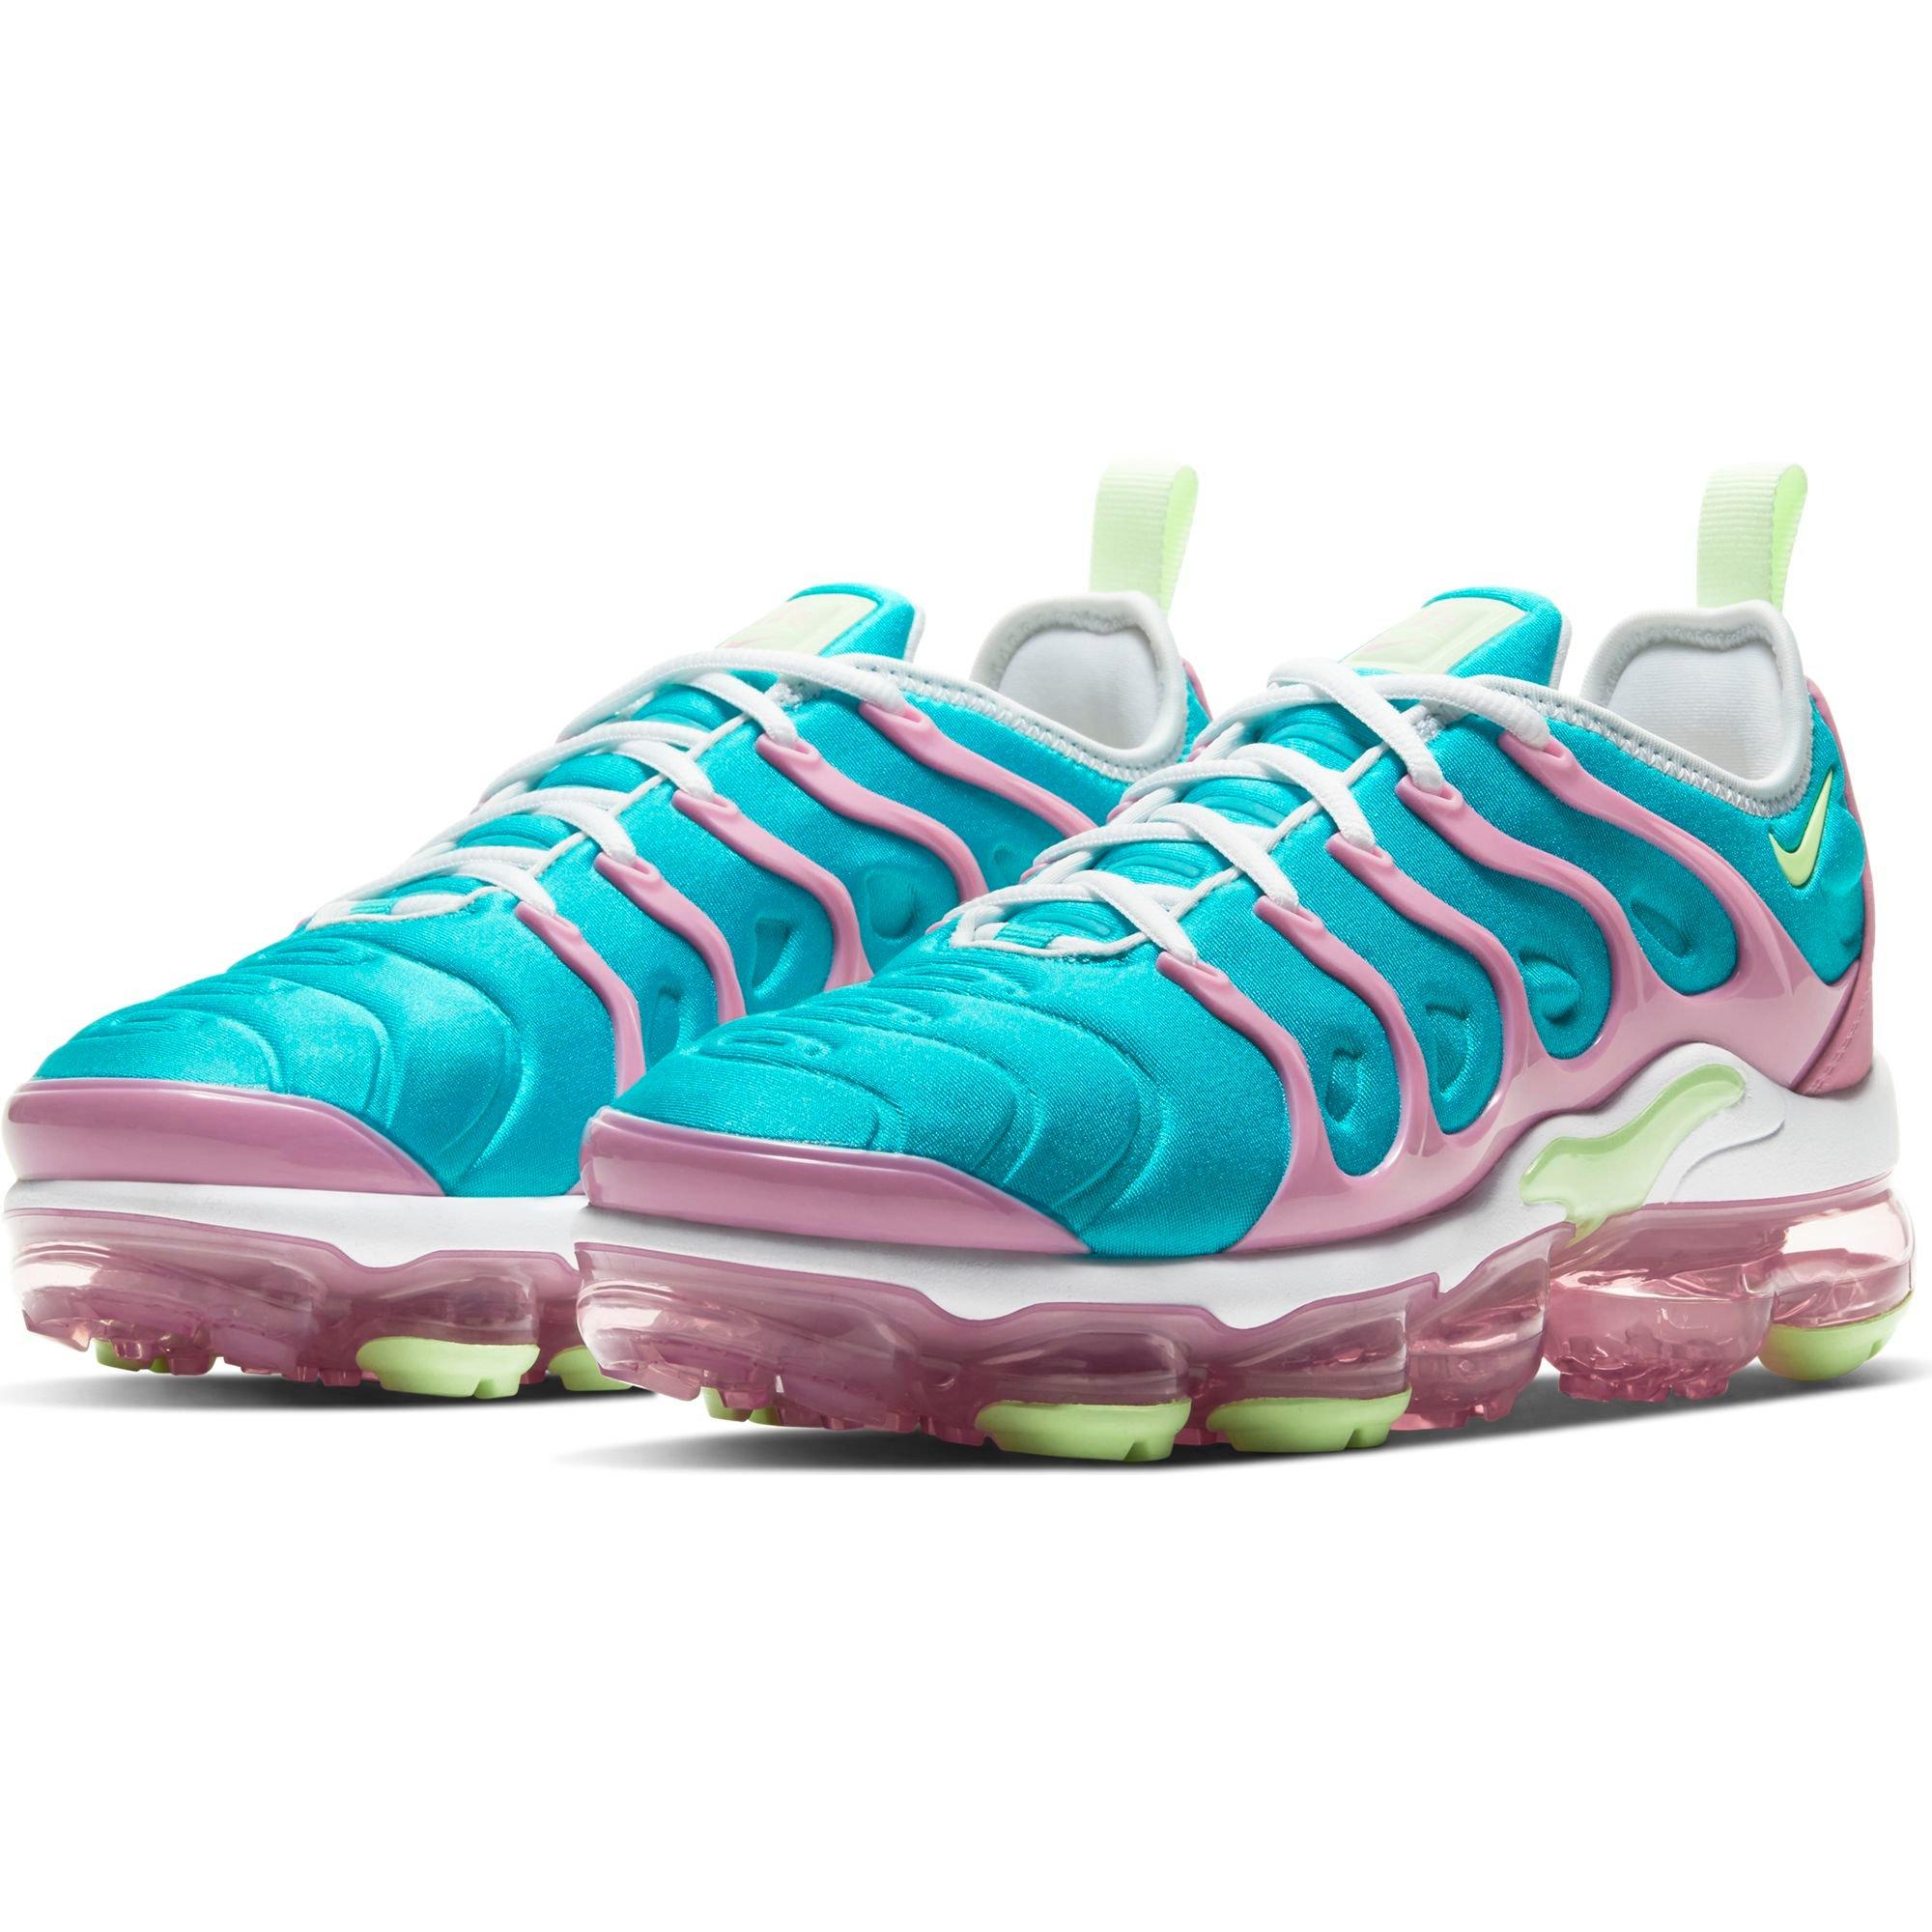 vapor max blue and pink